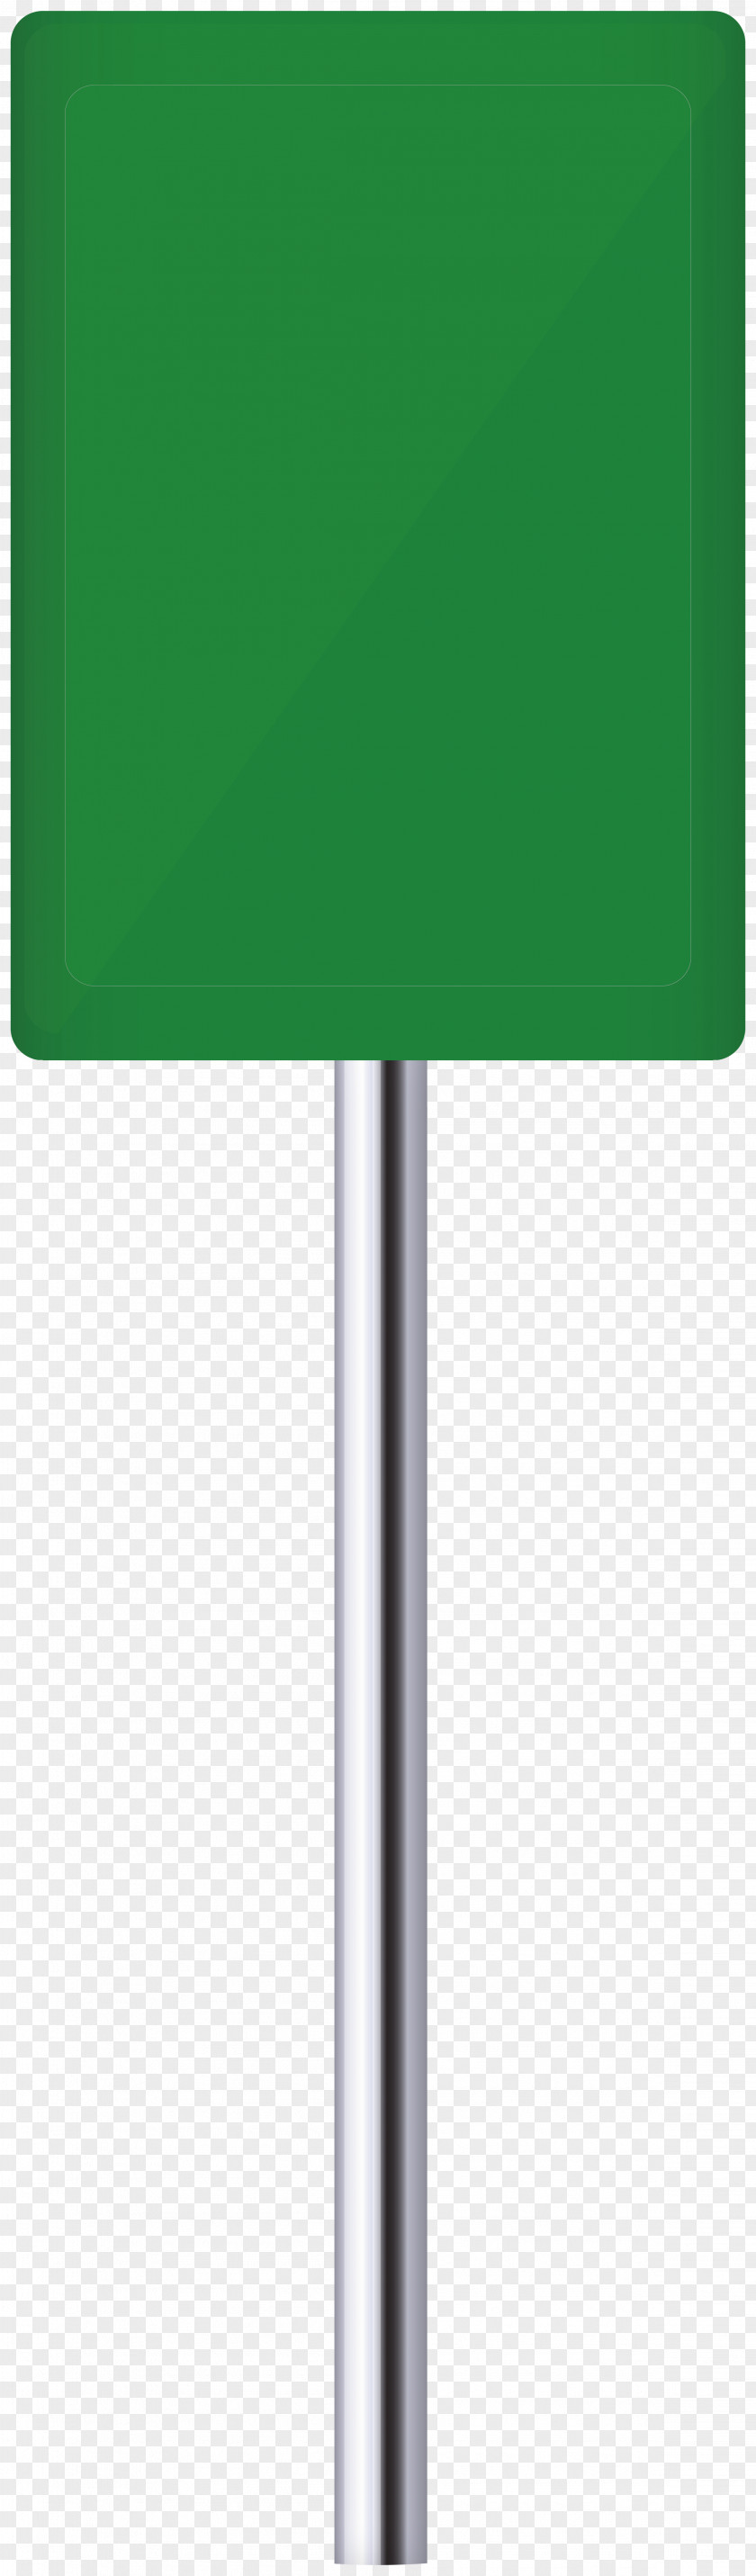 Road Sign Green Clip Art Transparency Image Vector Graphics PNG